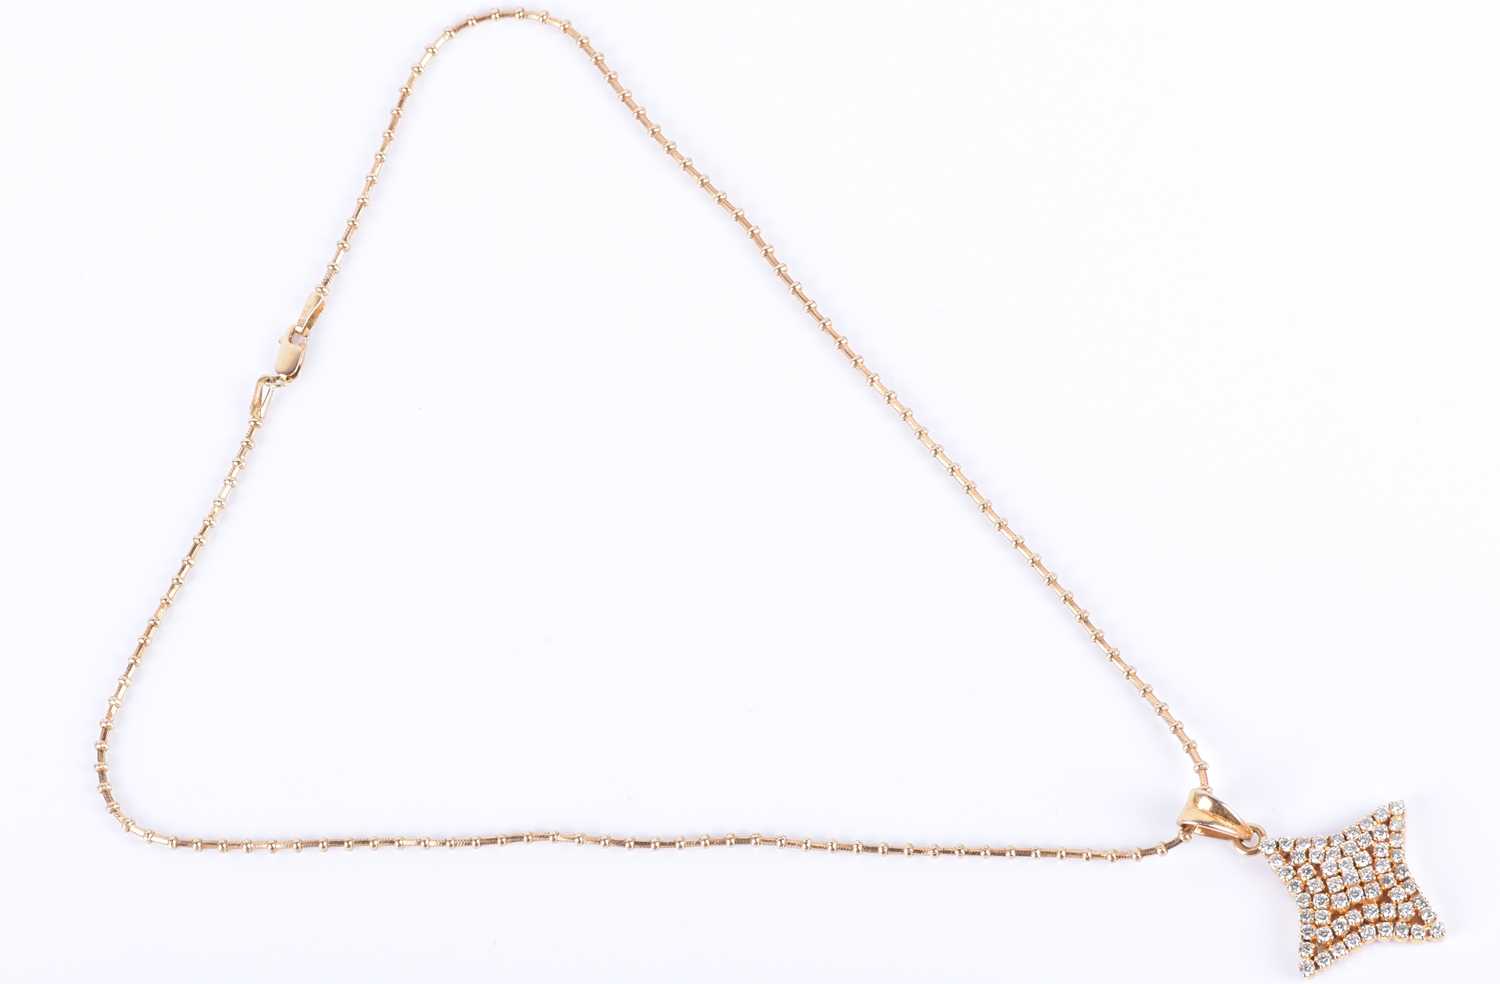 An 18ct yellow gold and diamond pendantin the shape of a four-pointed star, set with round